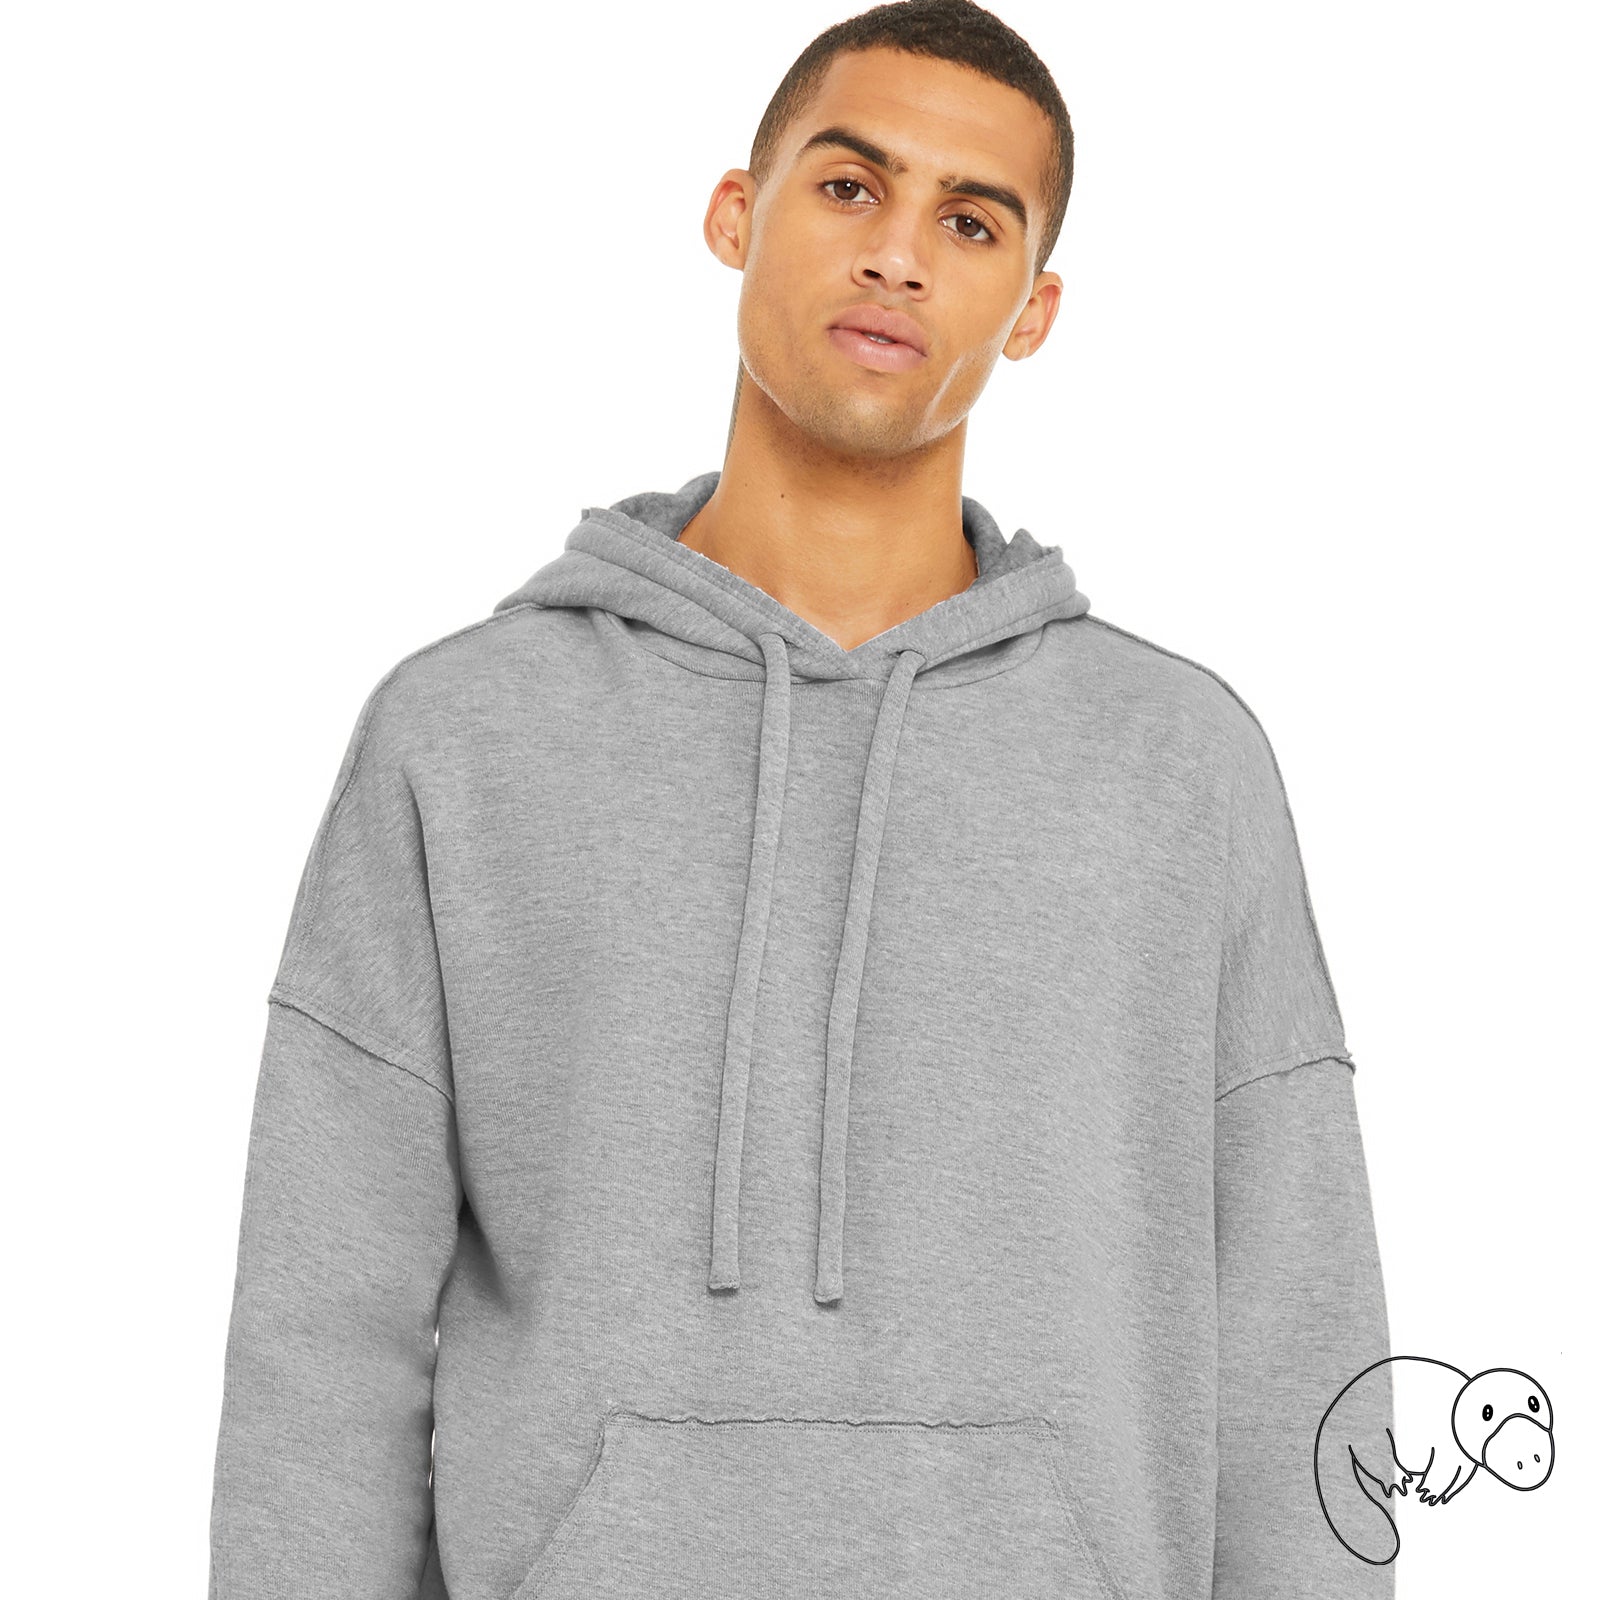 guy-cute-sweatshirt-grey-hoodie-face-mask-Plats-Hoodie-facemask-all-in-one-convertible-plats-hoodie-platinum-platypus-new-product